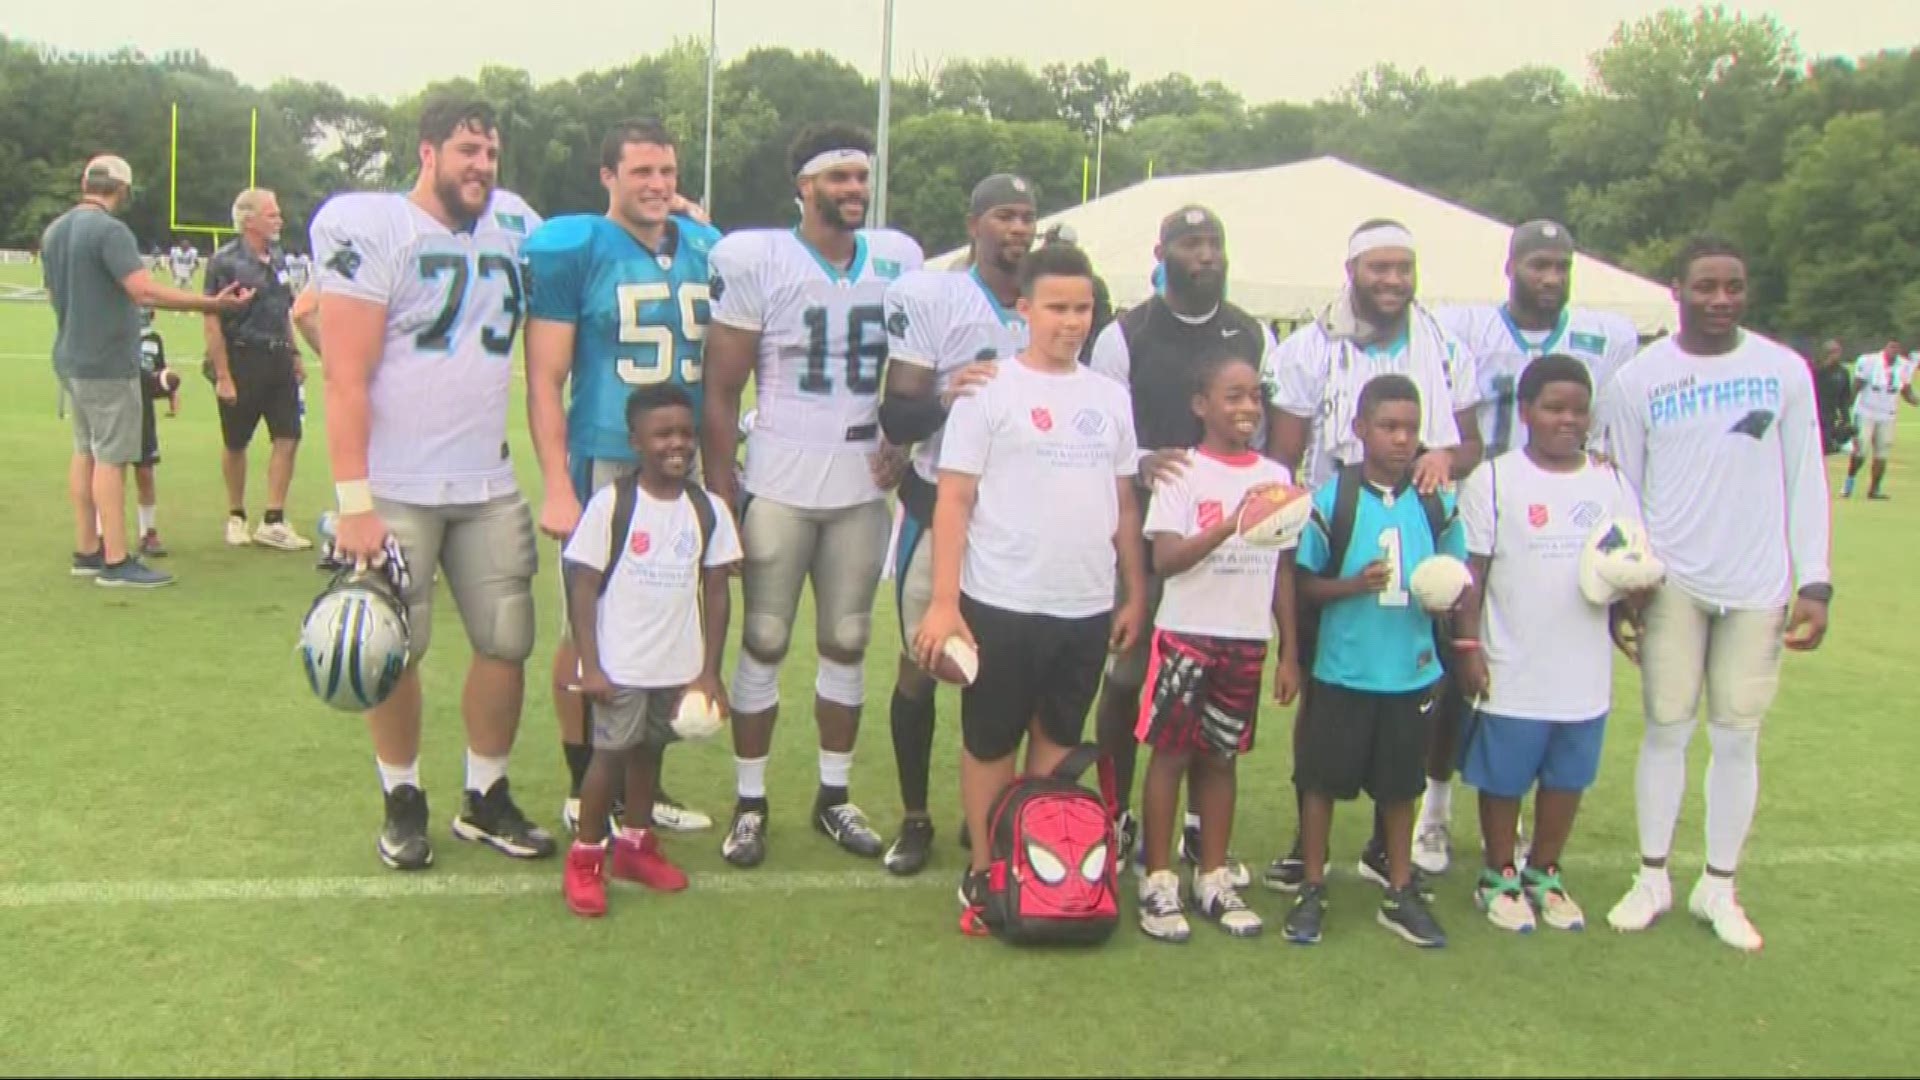 The kids were only supposed to meet one of the players Monday, but ended up meeting several Panthers including Luke Kuechly.